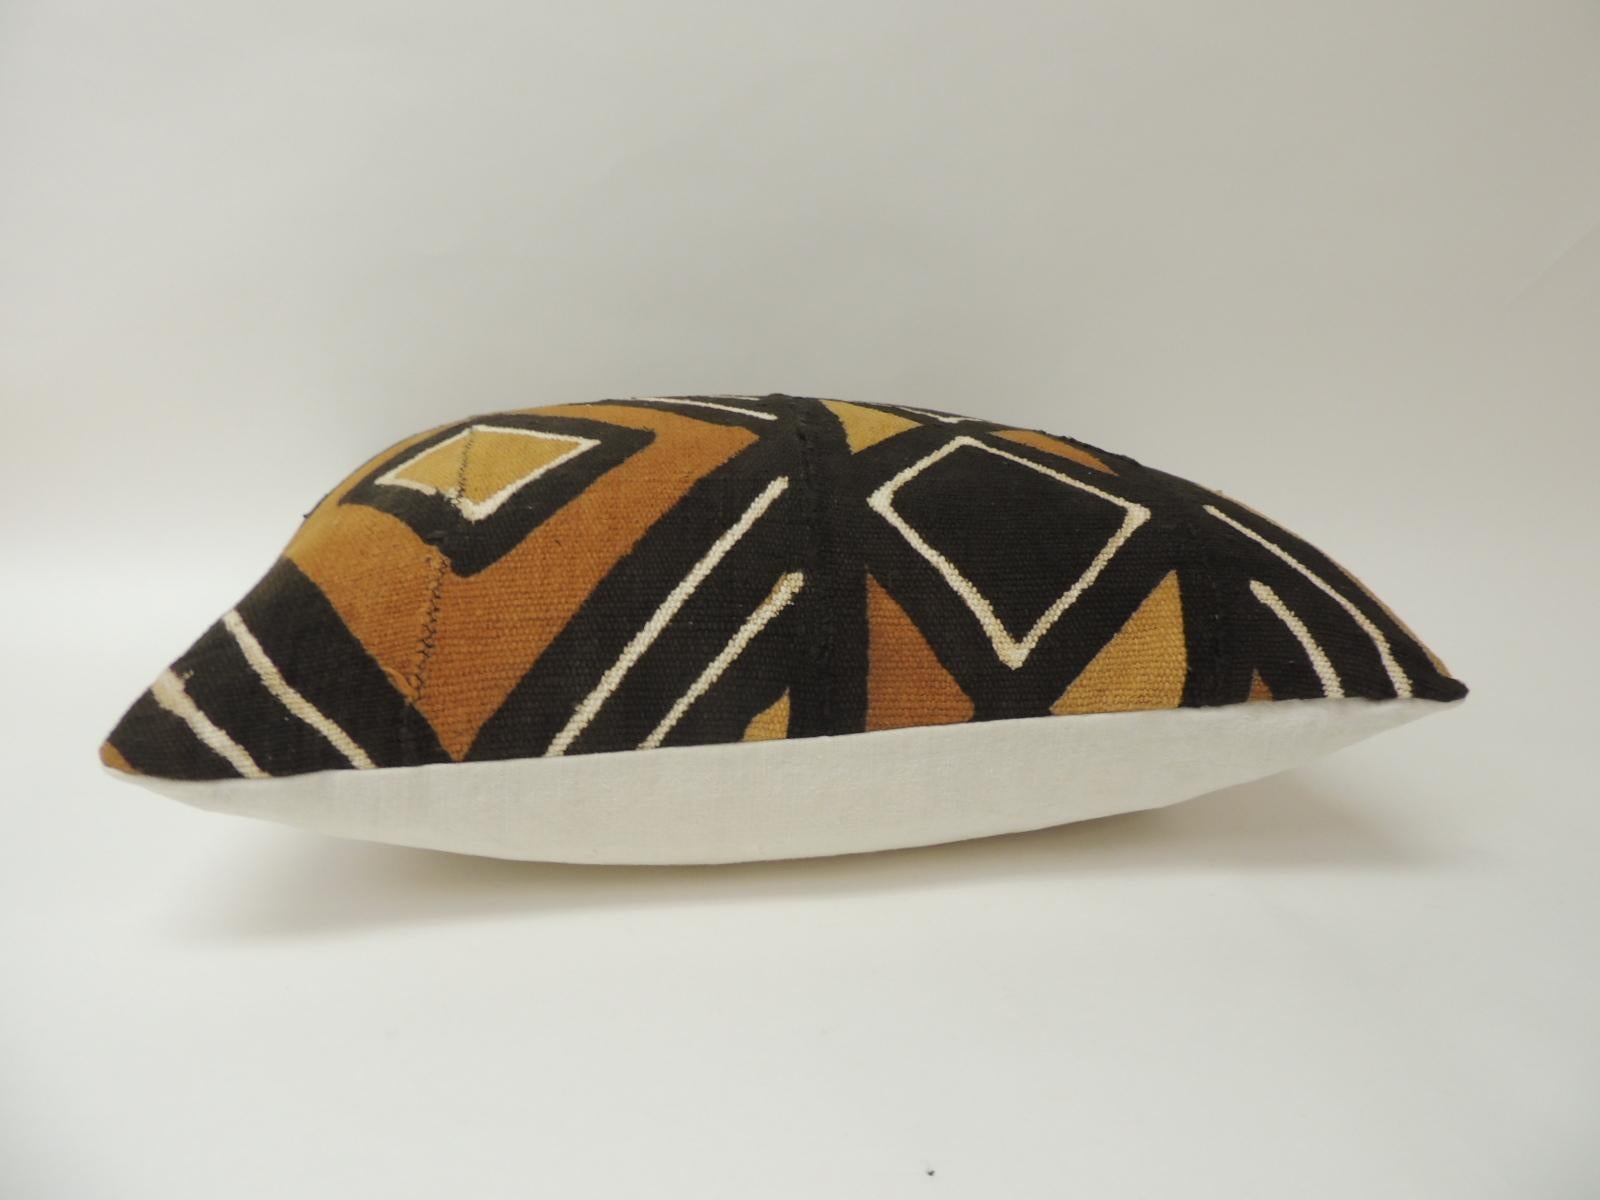 Tribal Vintage Graphic African Artisanal Textile Mudcloth Decorative Bolster Pillow